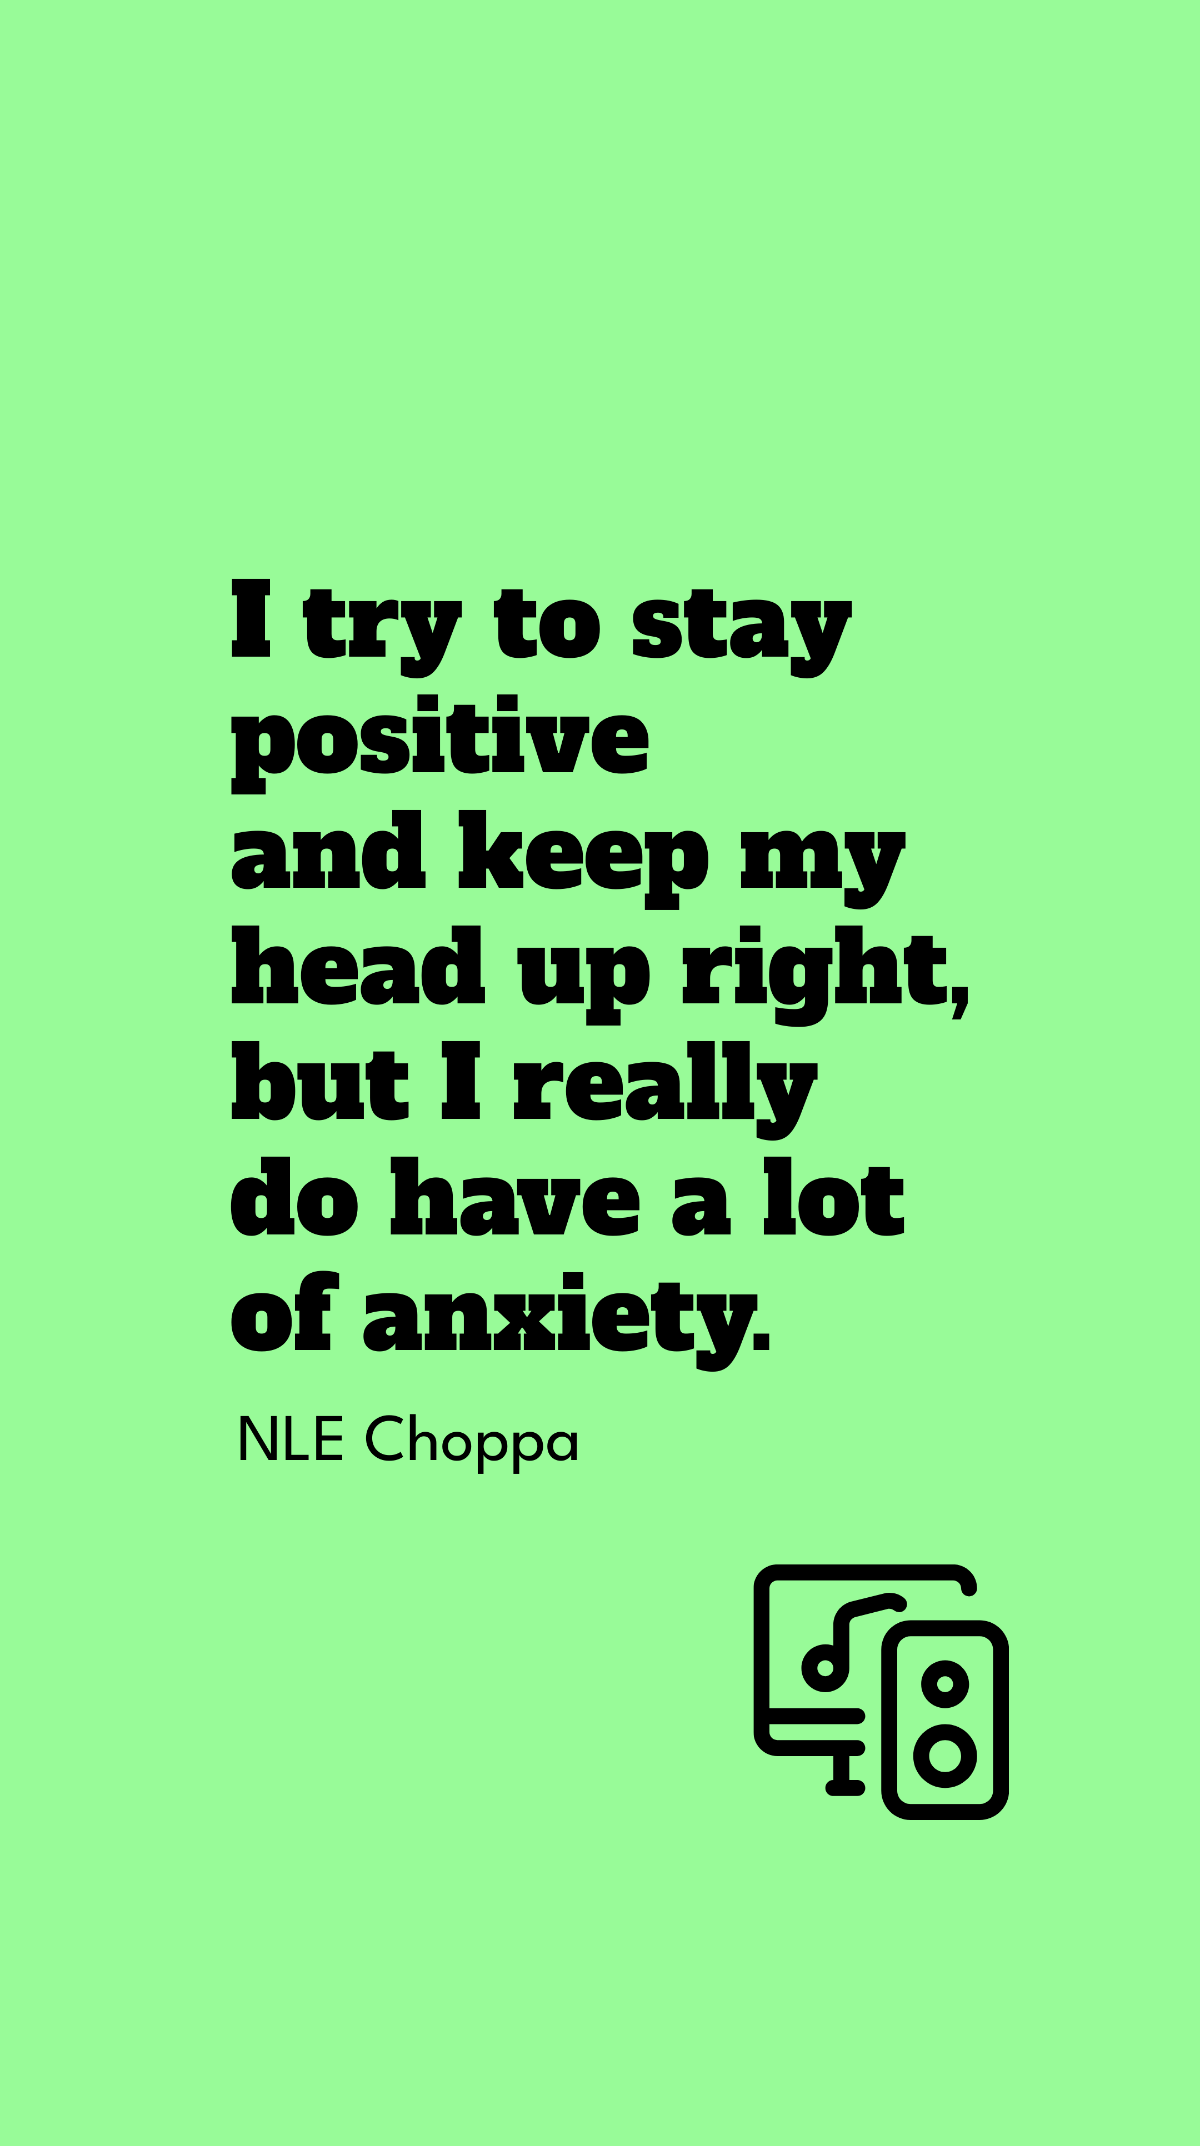 NLE Choppa - I try to stay positive and keep my head up right, but I really do have a lot of anxiety. Template